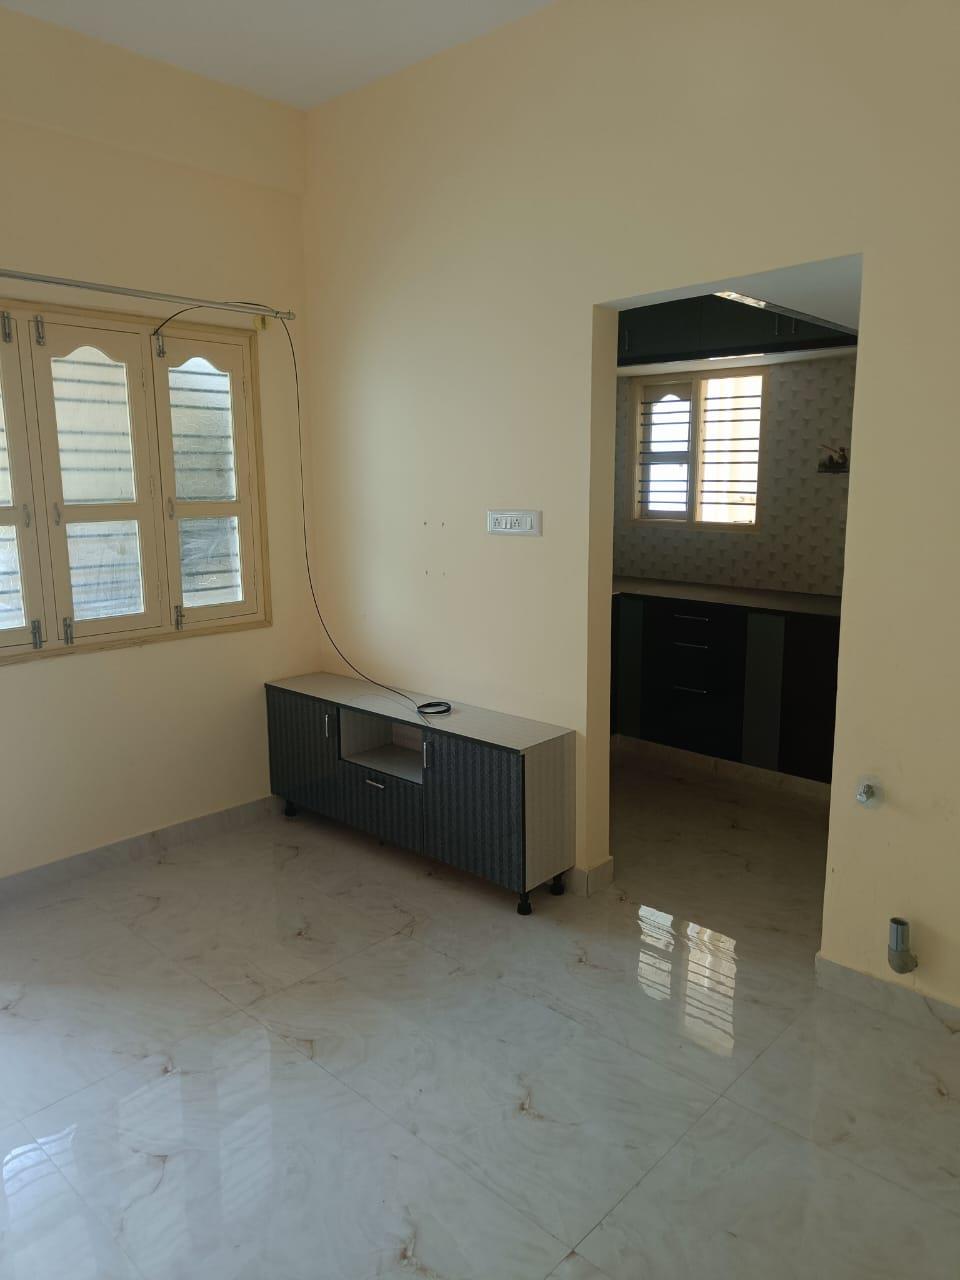 1 BHK Independent House for Lease Only at JAML2 - 688 in Domlur